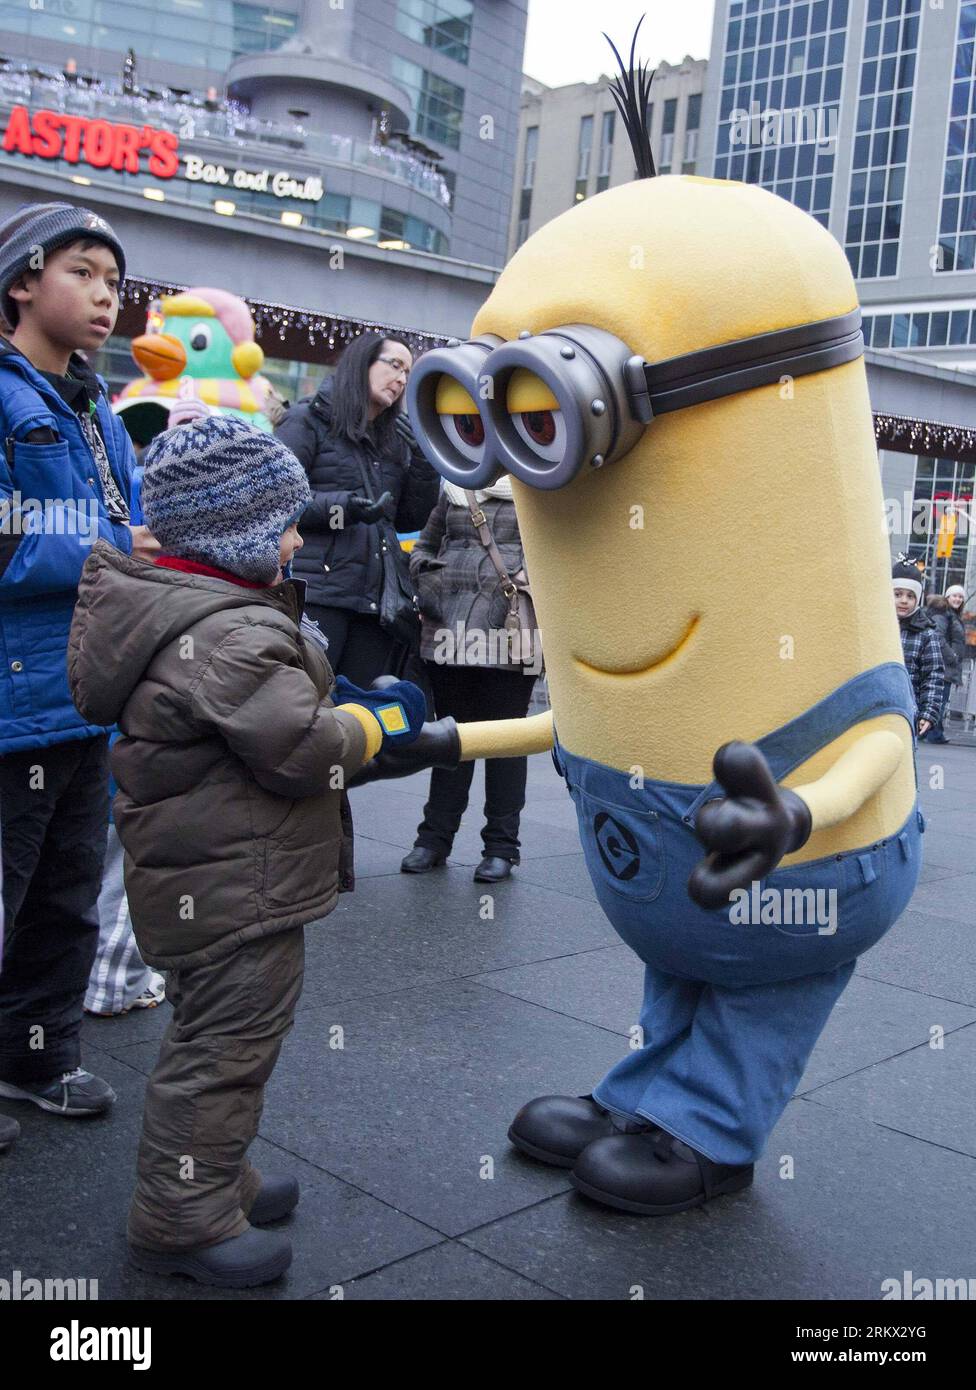 Bildnummer: 58862109  Datum: 01.12.2012  Copyright: imago/Xinhua (121202) -- TORONTO, Dec. 2, 2012 (Xinhua) -- A costumed Minion of a character from the animated movie Megamind plays with children during the 2012 Winter Magic Kidzfest at Yonge-Dundas Square in Toronto, Canada, on Dec. 1, 2012. The annual event offered many perfomances and games to entertain children of all ages. (Xinhua/Zou Zheng) (syq) CANADA-TORONTO-THE WINTER MAGIC KIDZFEST PUBLICATIONxNOTxINxCHN Gesellschaft Kind Kinderfest Objekte Figur x0x xac 2012 hoch      58862109 Date 01 12 2012 Copyright Imago XINHUA  Toronto DEC 2 Stock Photo